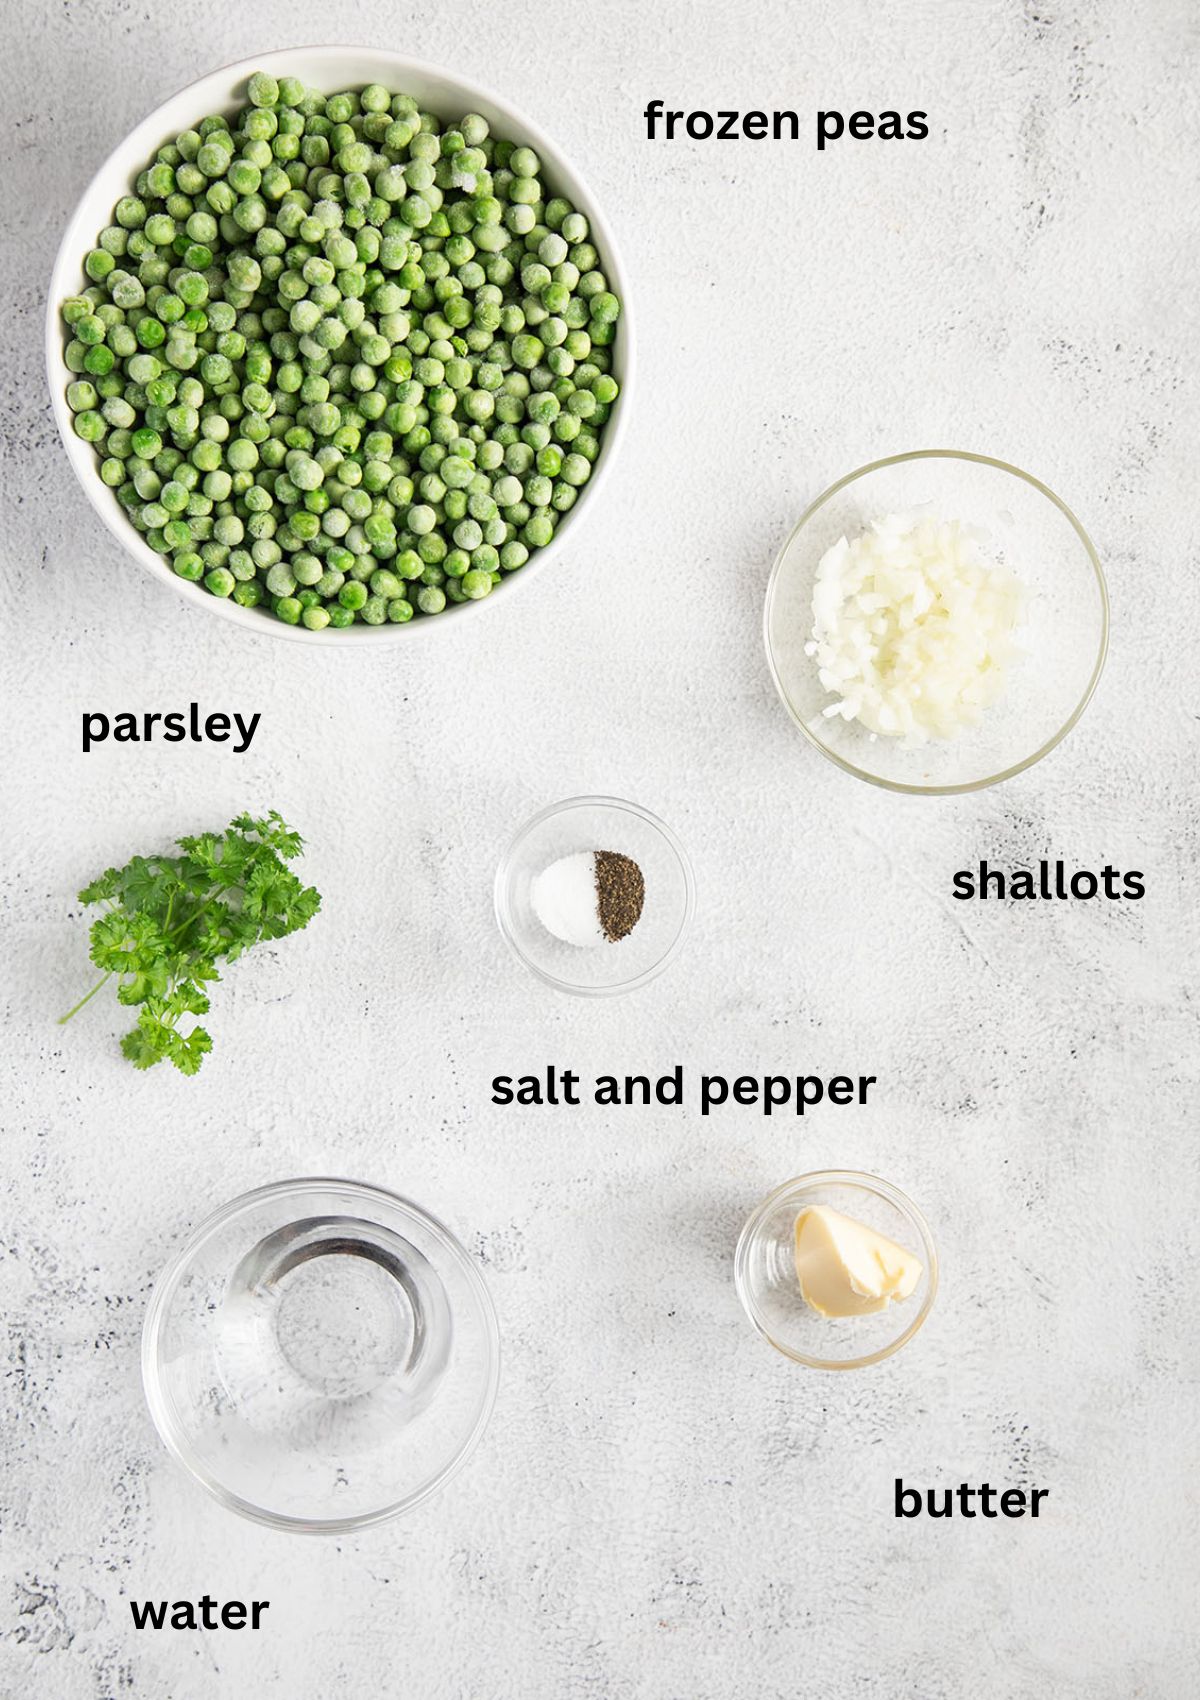 labeled ingredients for cooking peas with butter, parsley, water, shallot, salt and pepper.